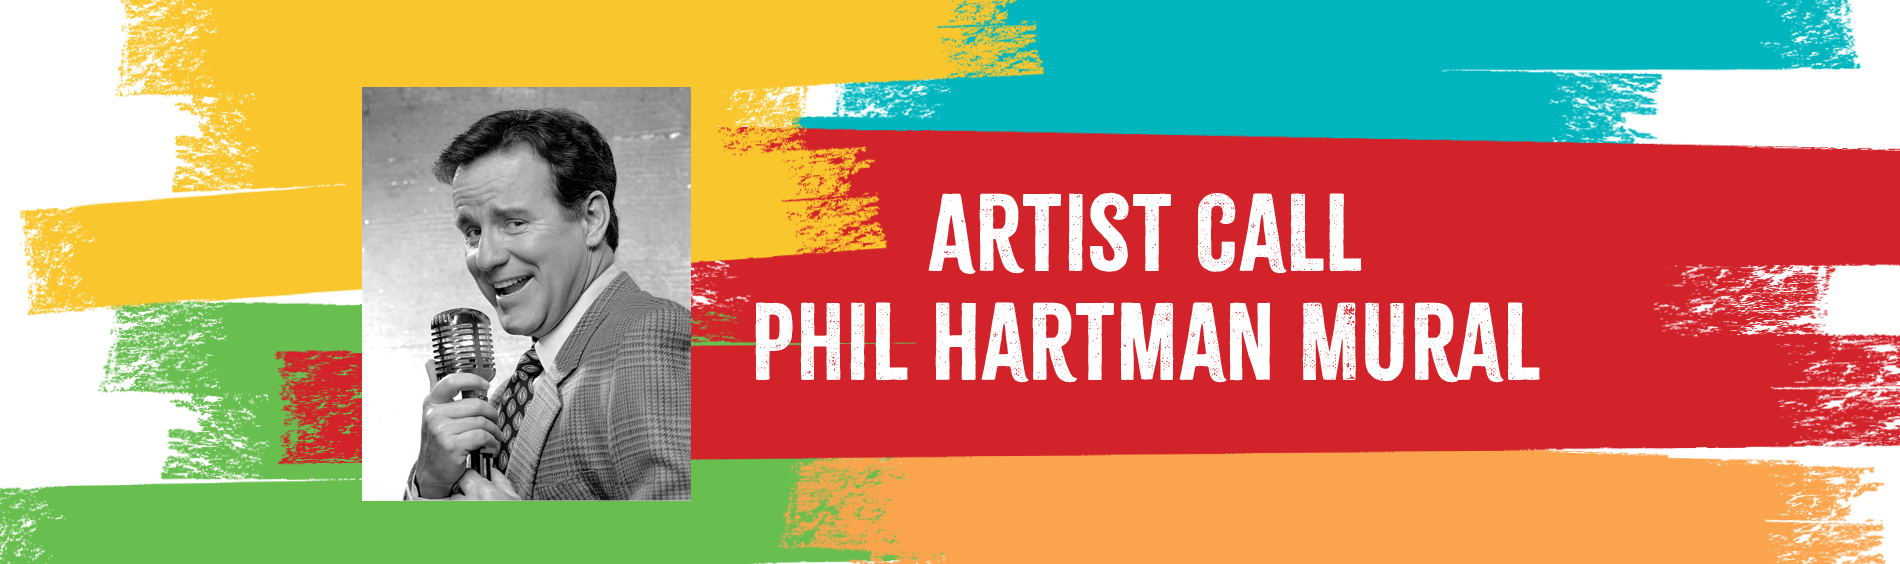 Call for Artists - Phil Hartman Mural